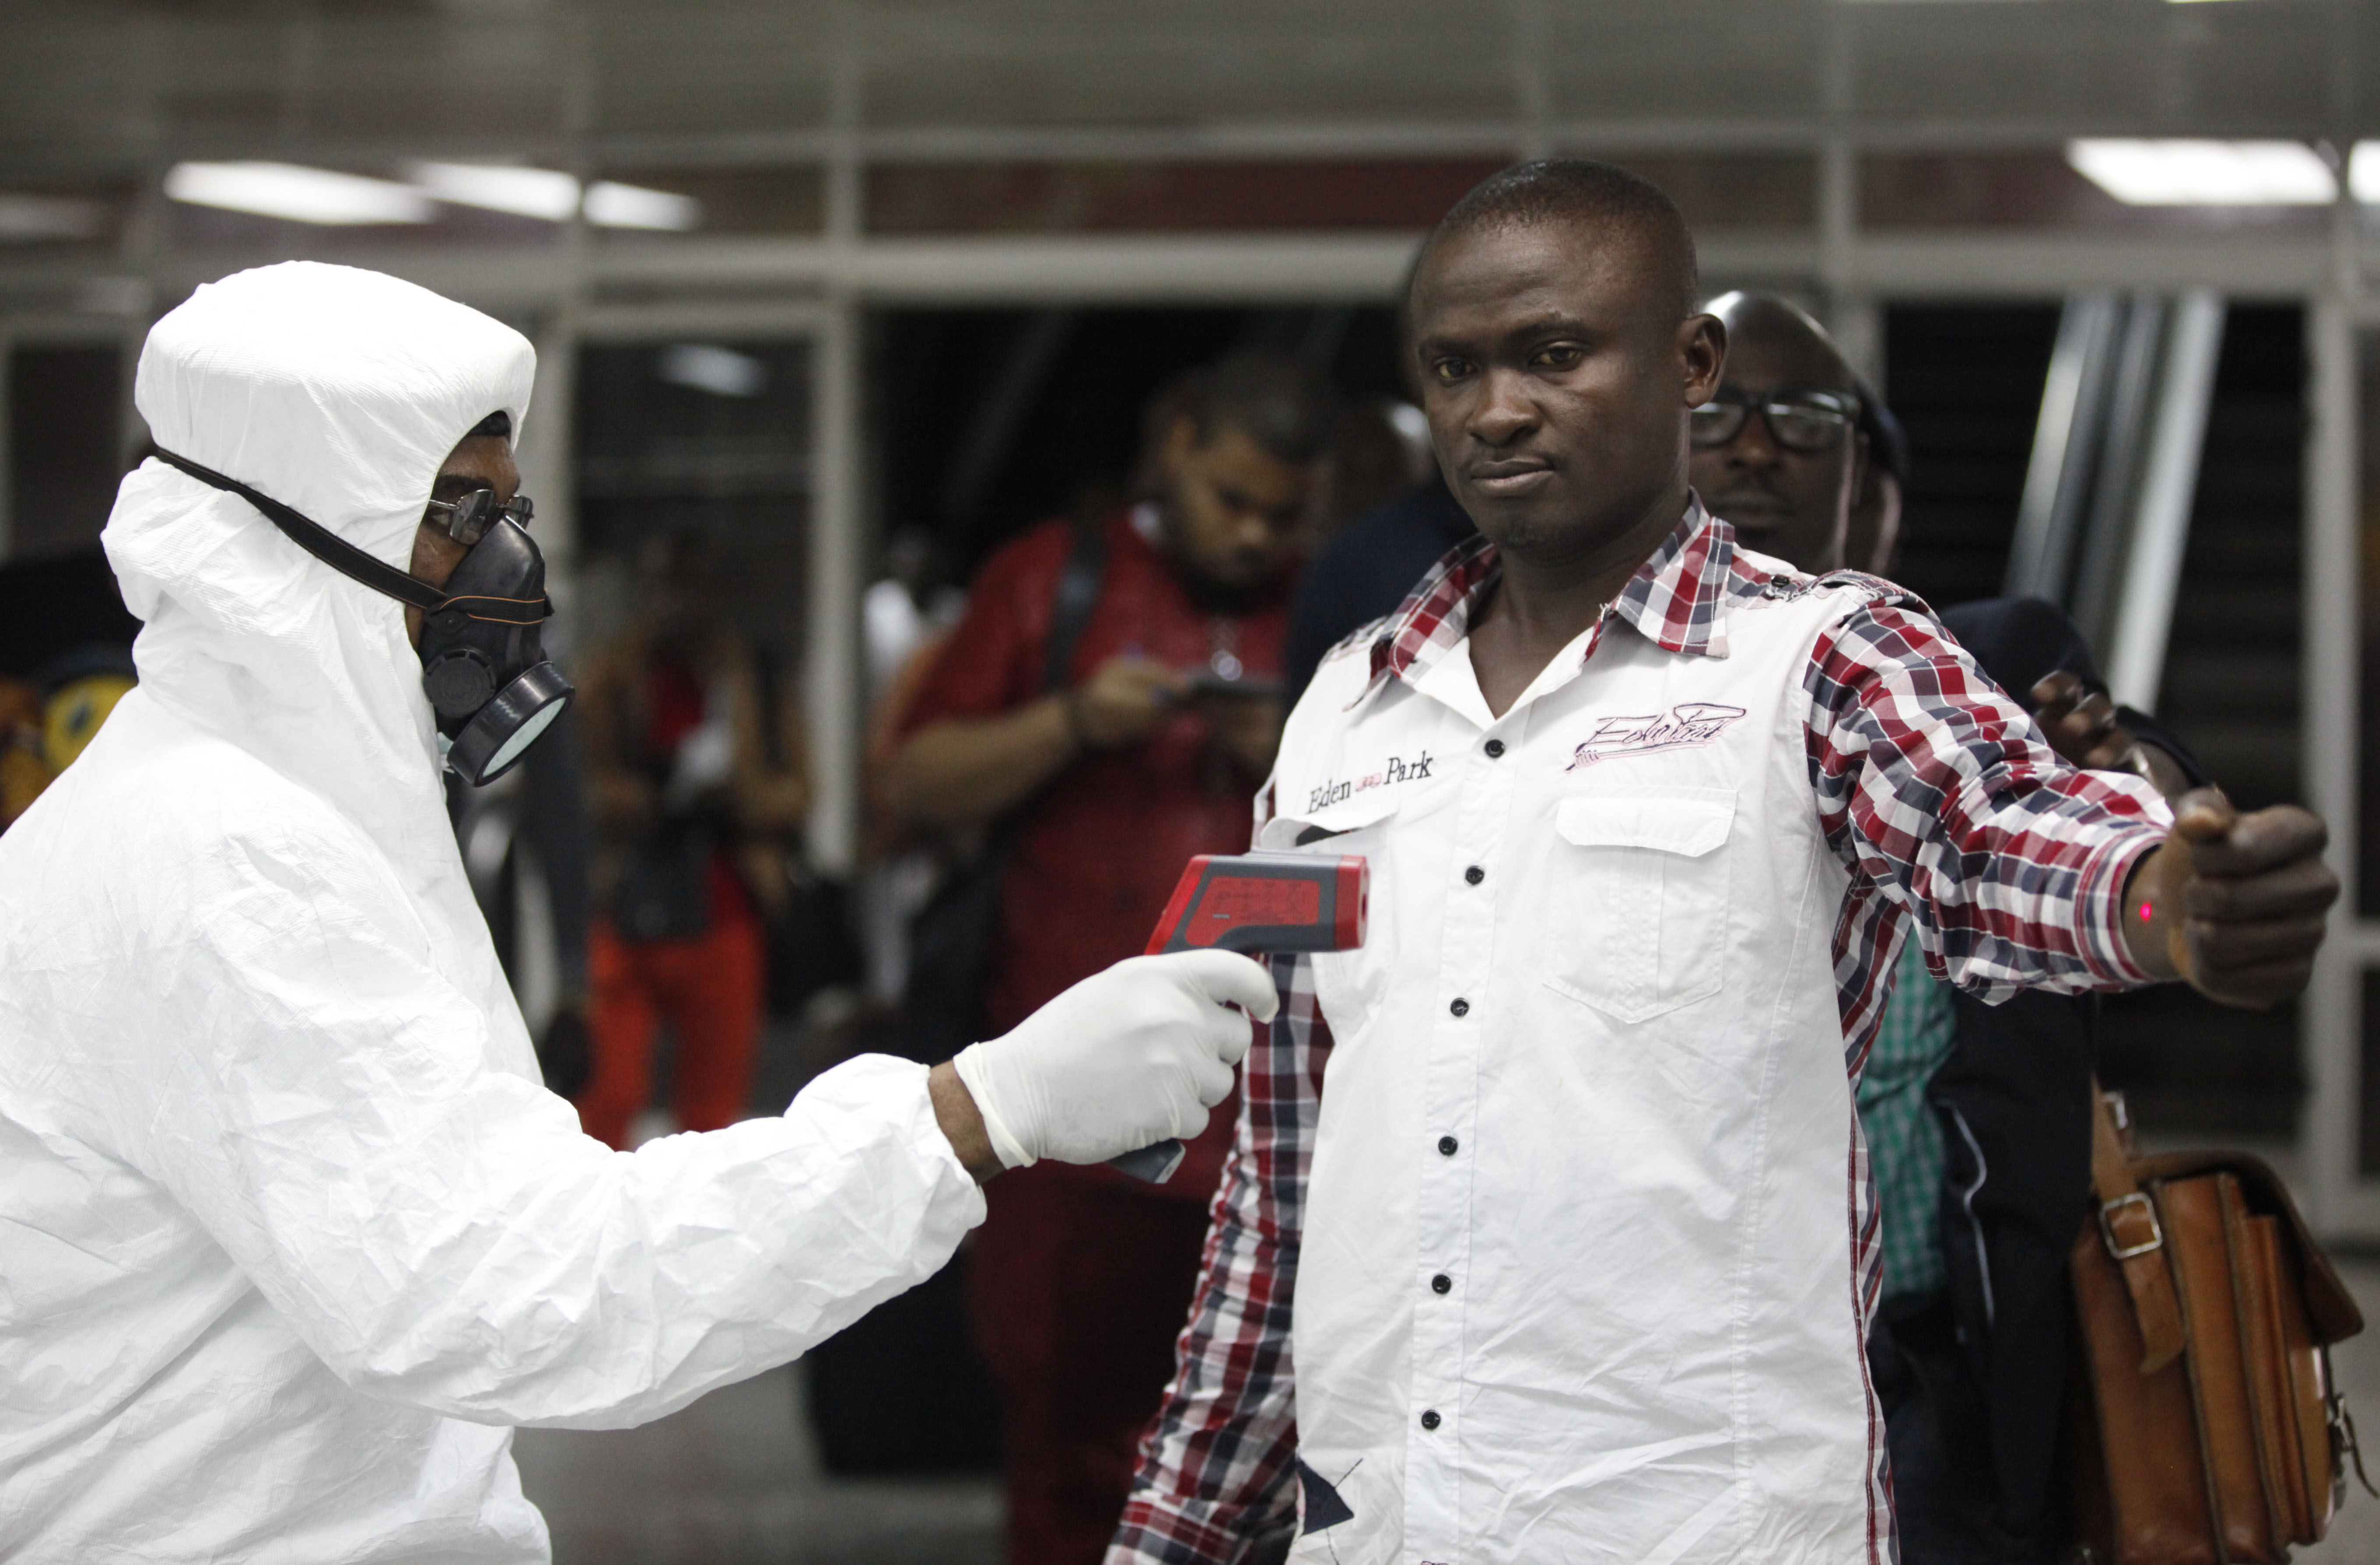 A Nigerian port health official uses a thermometer on a worker at the arrivals hall of Murtala Muhammed International Airport in Lagos, Nigeria, Wednesday, Aug. 6, 2014. (AP Photo)